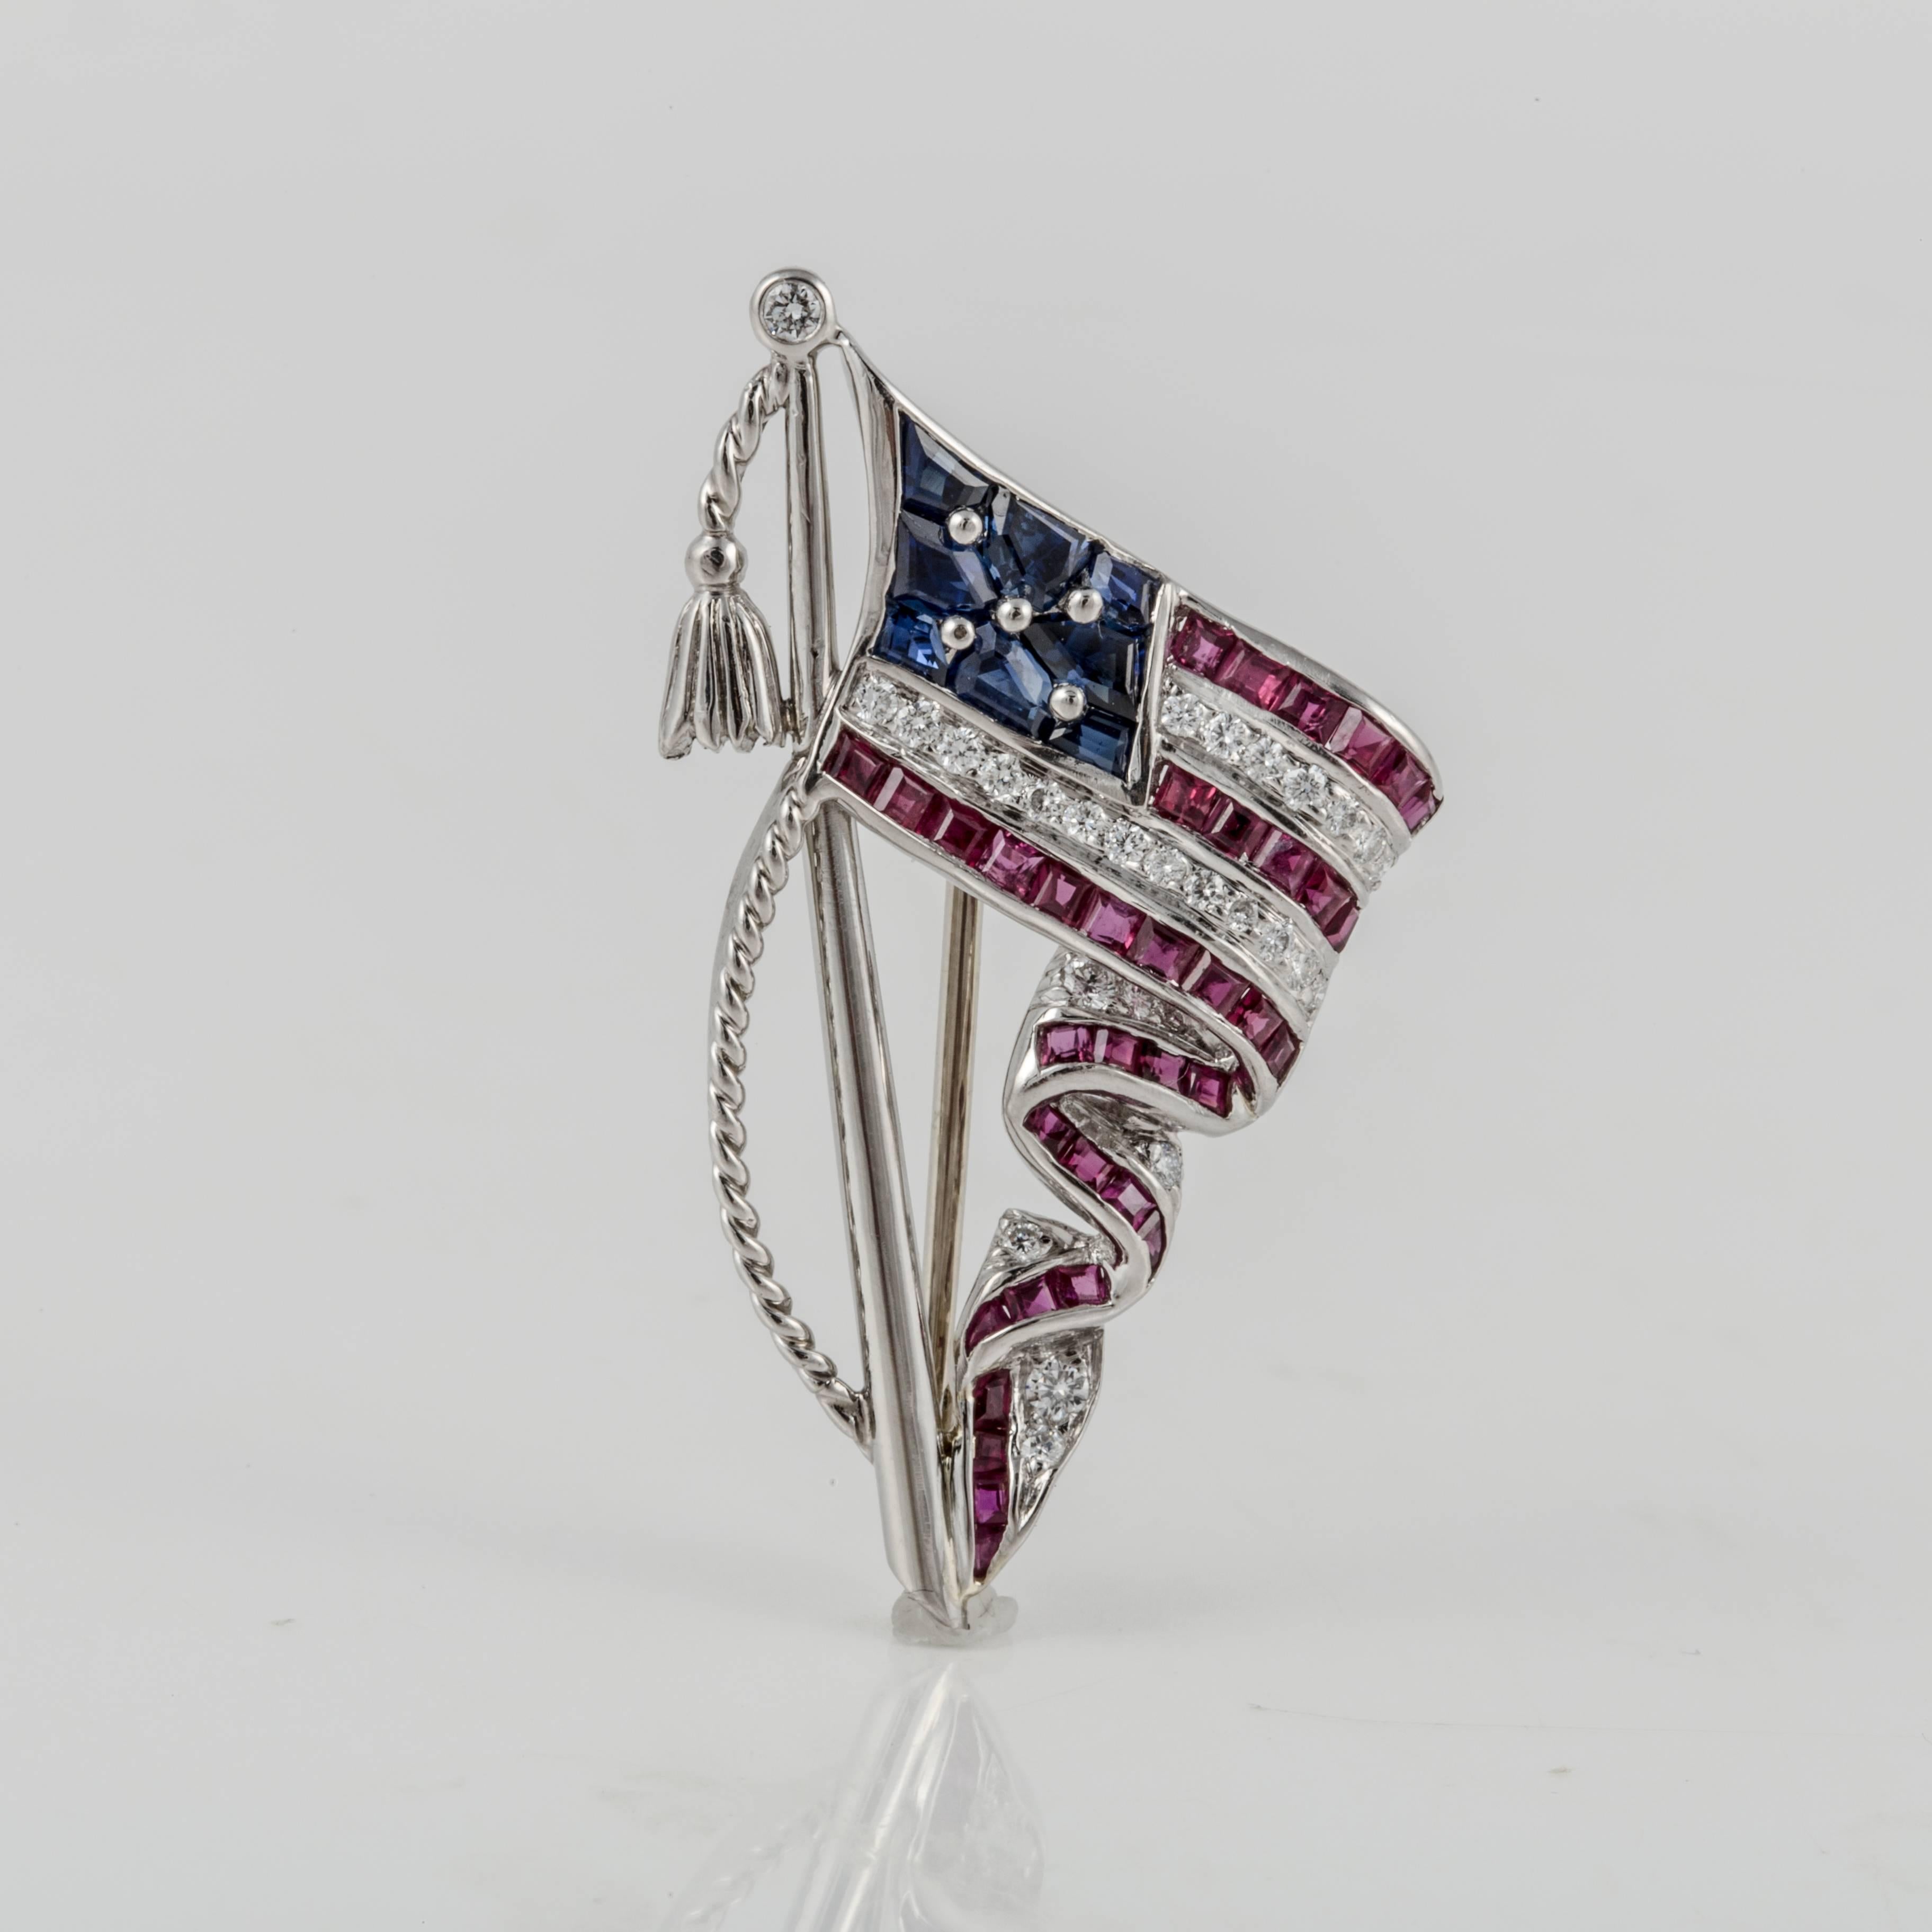 Oscar Heyman flag pin in platinum with sapphires, rubies and diamonds.  Marked 